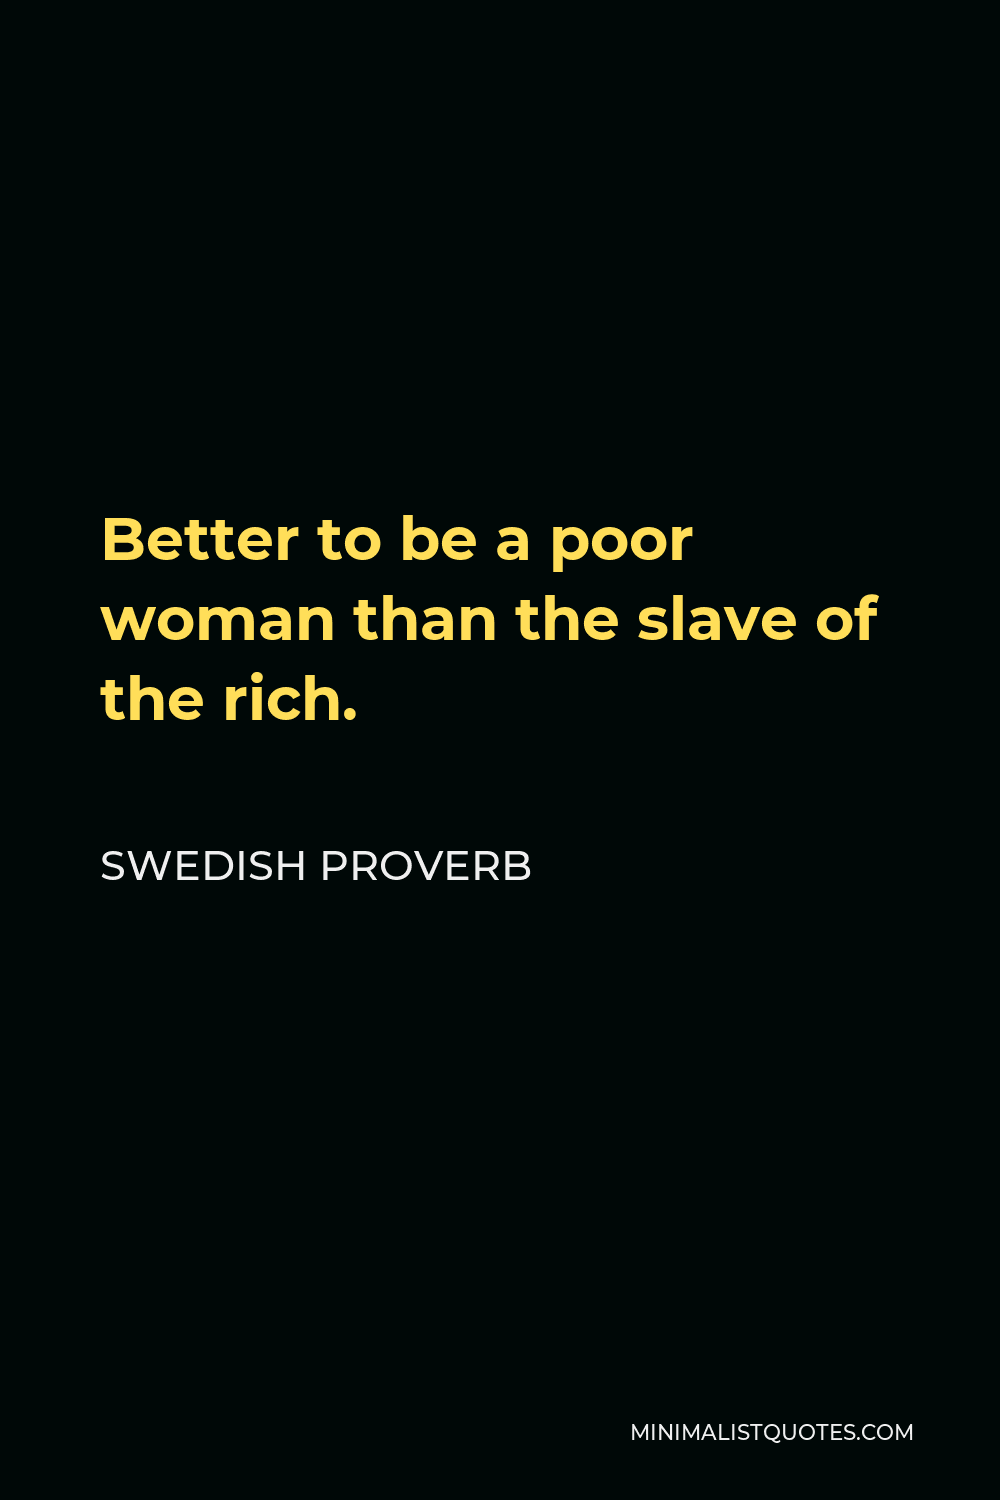 Swedish Proverb Quote - Better to be a poor woman than the slave of the rich.